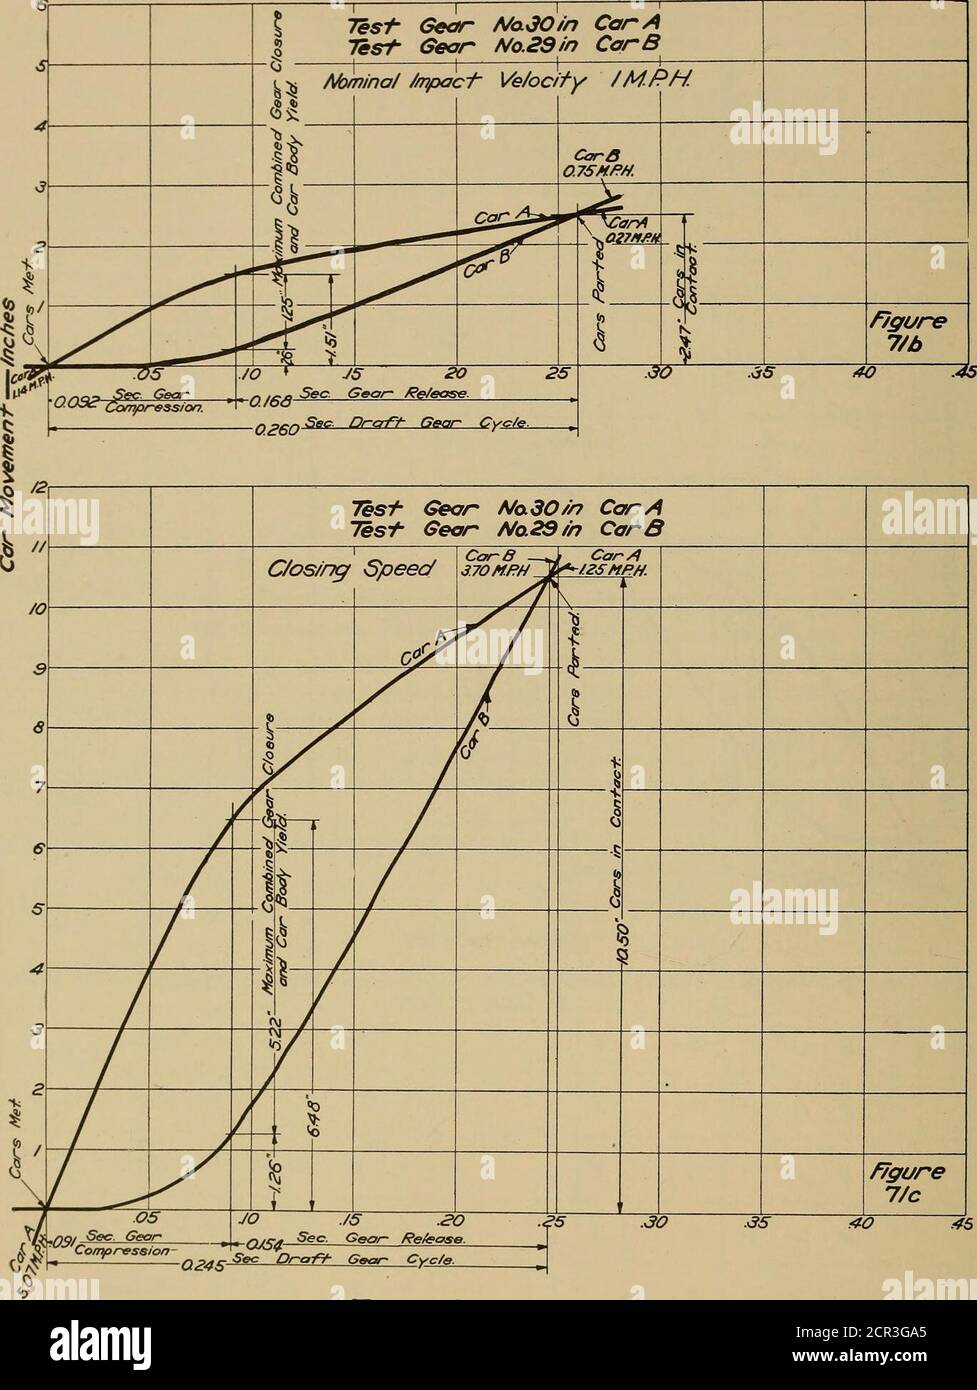 . Report of draft gear tests, United State Railroad administration, Inspection and test section; . 77me—Seconds Fig. 71a—Car-Movement Curves, Superimposed. National H-l Gears. These Curves Drawn by Cars in Test 146 Draft Gear Tests of the U. 5. Railroad Administration i —^—J Test- Gear A/a JO in Car ATest Gear No.29in Car 3 ■i : 1— —&lt;— Nomina/ /rrpac-f Velocity /ftif?H. 77me — Seconds Figs. 71b and 71c—Car-Movement Curves, Superimposed. National H-l GearsThese Curves Drawn by Cars in Tests Draft Gear Tests of the U. S. Railroad Administration 147 i Stock Photo